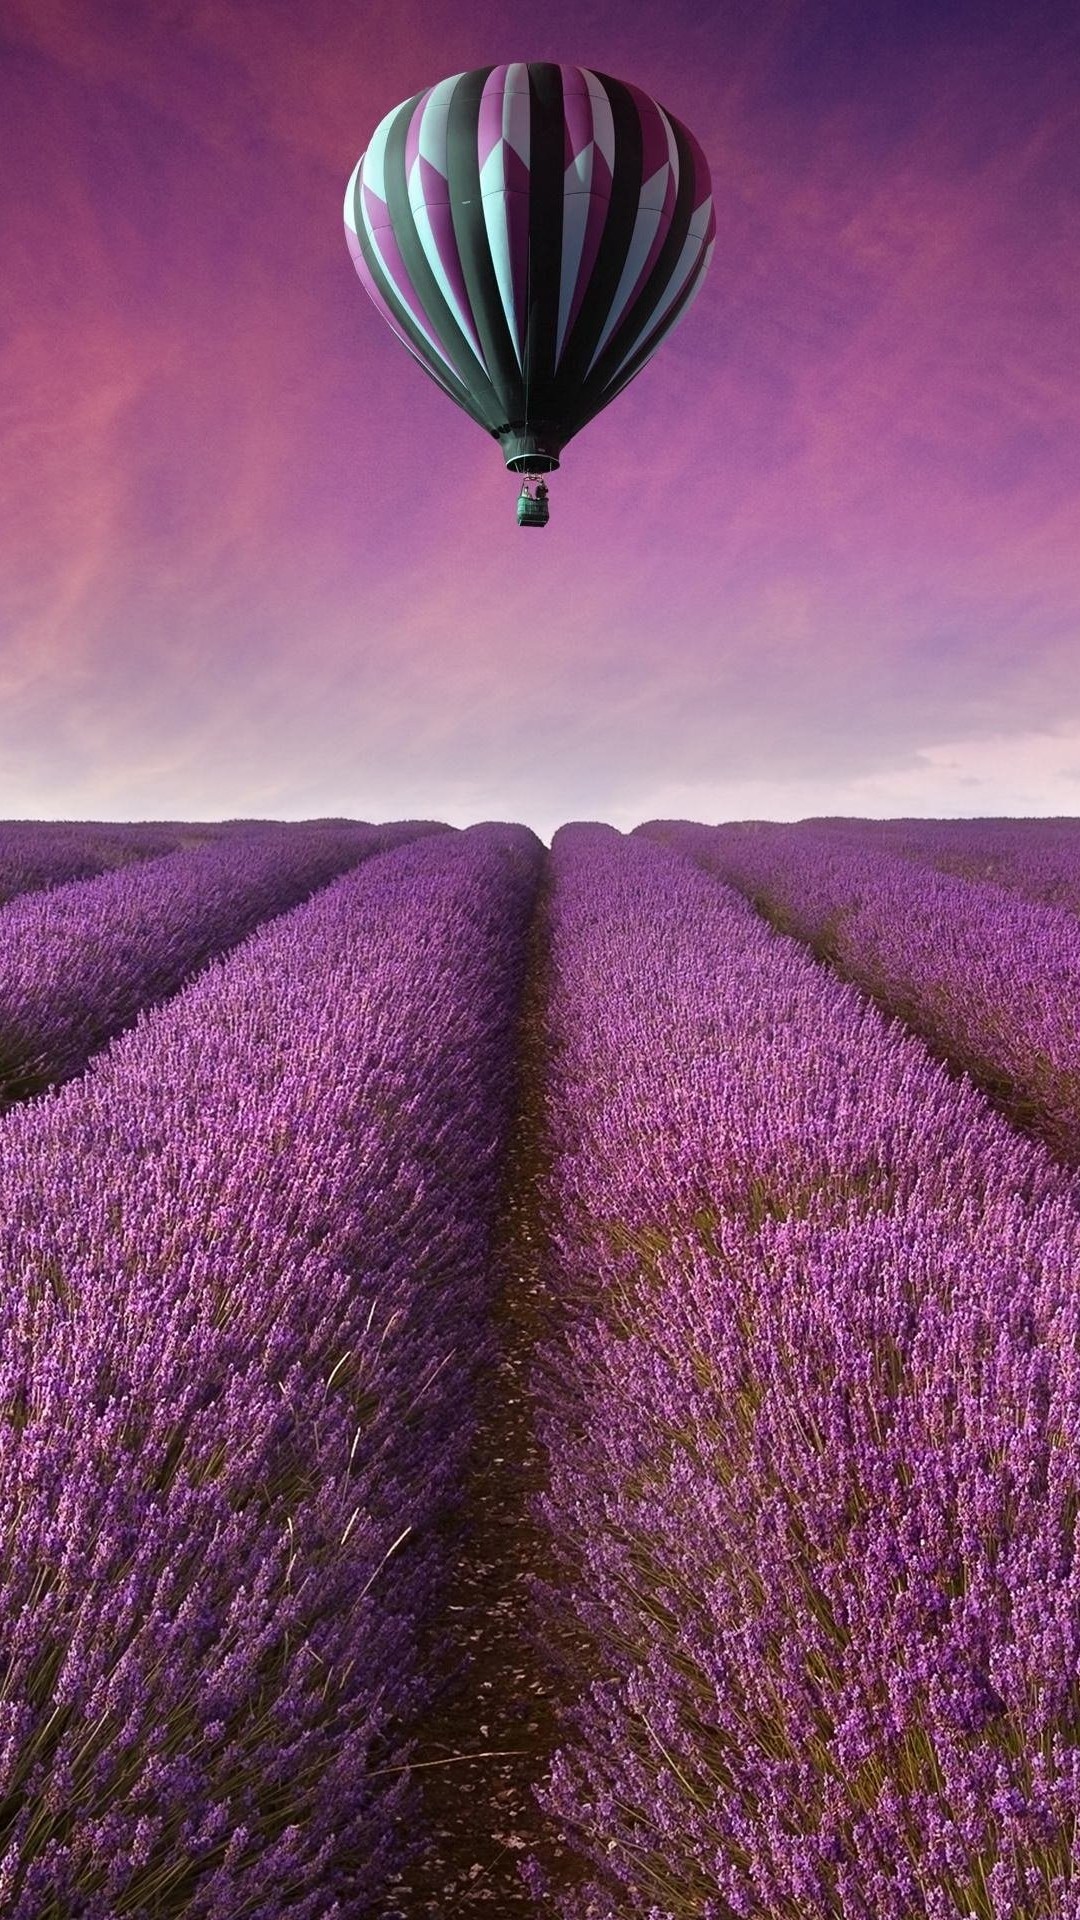 Hot Air Balloon Over Lavender Field Wallpaper for SONY Xperia Z3